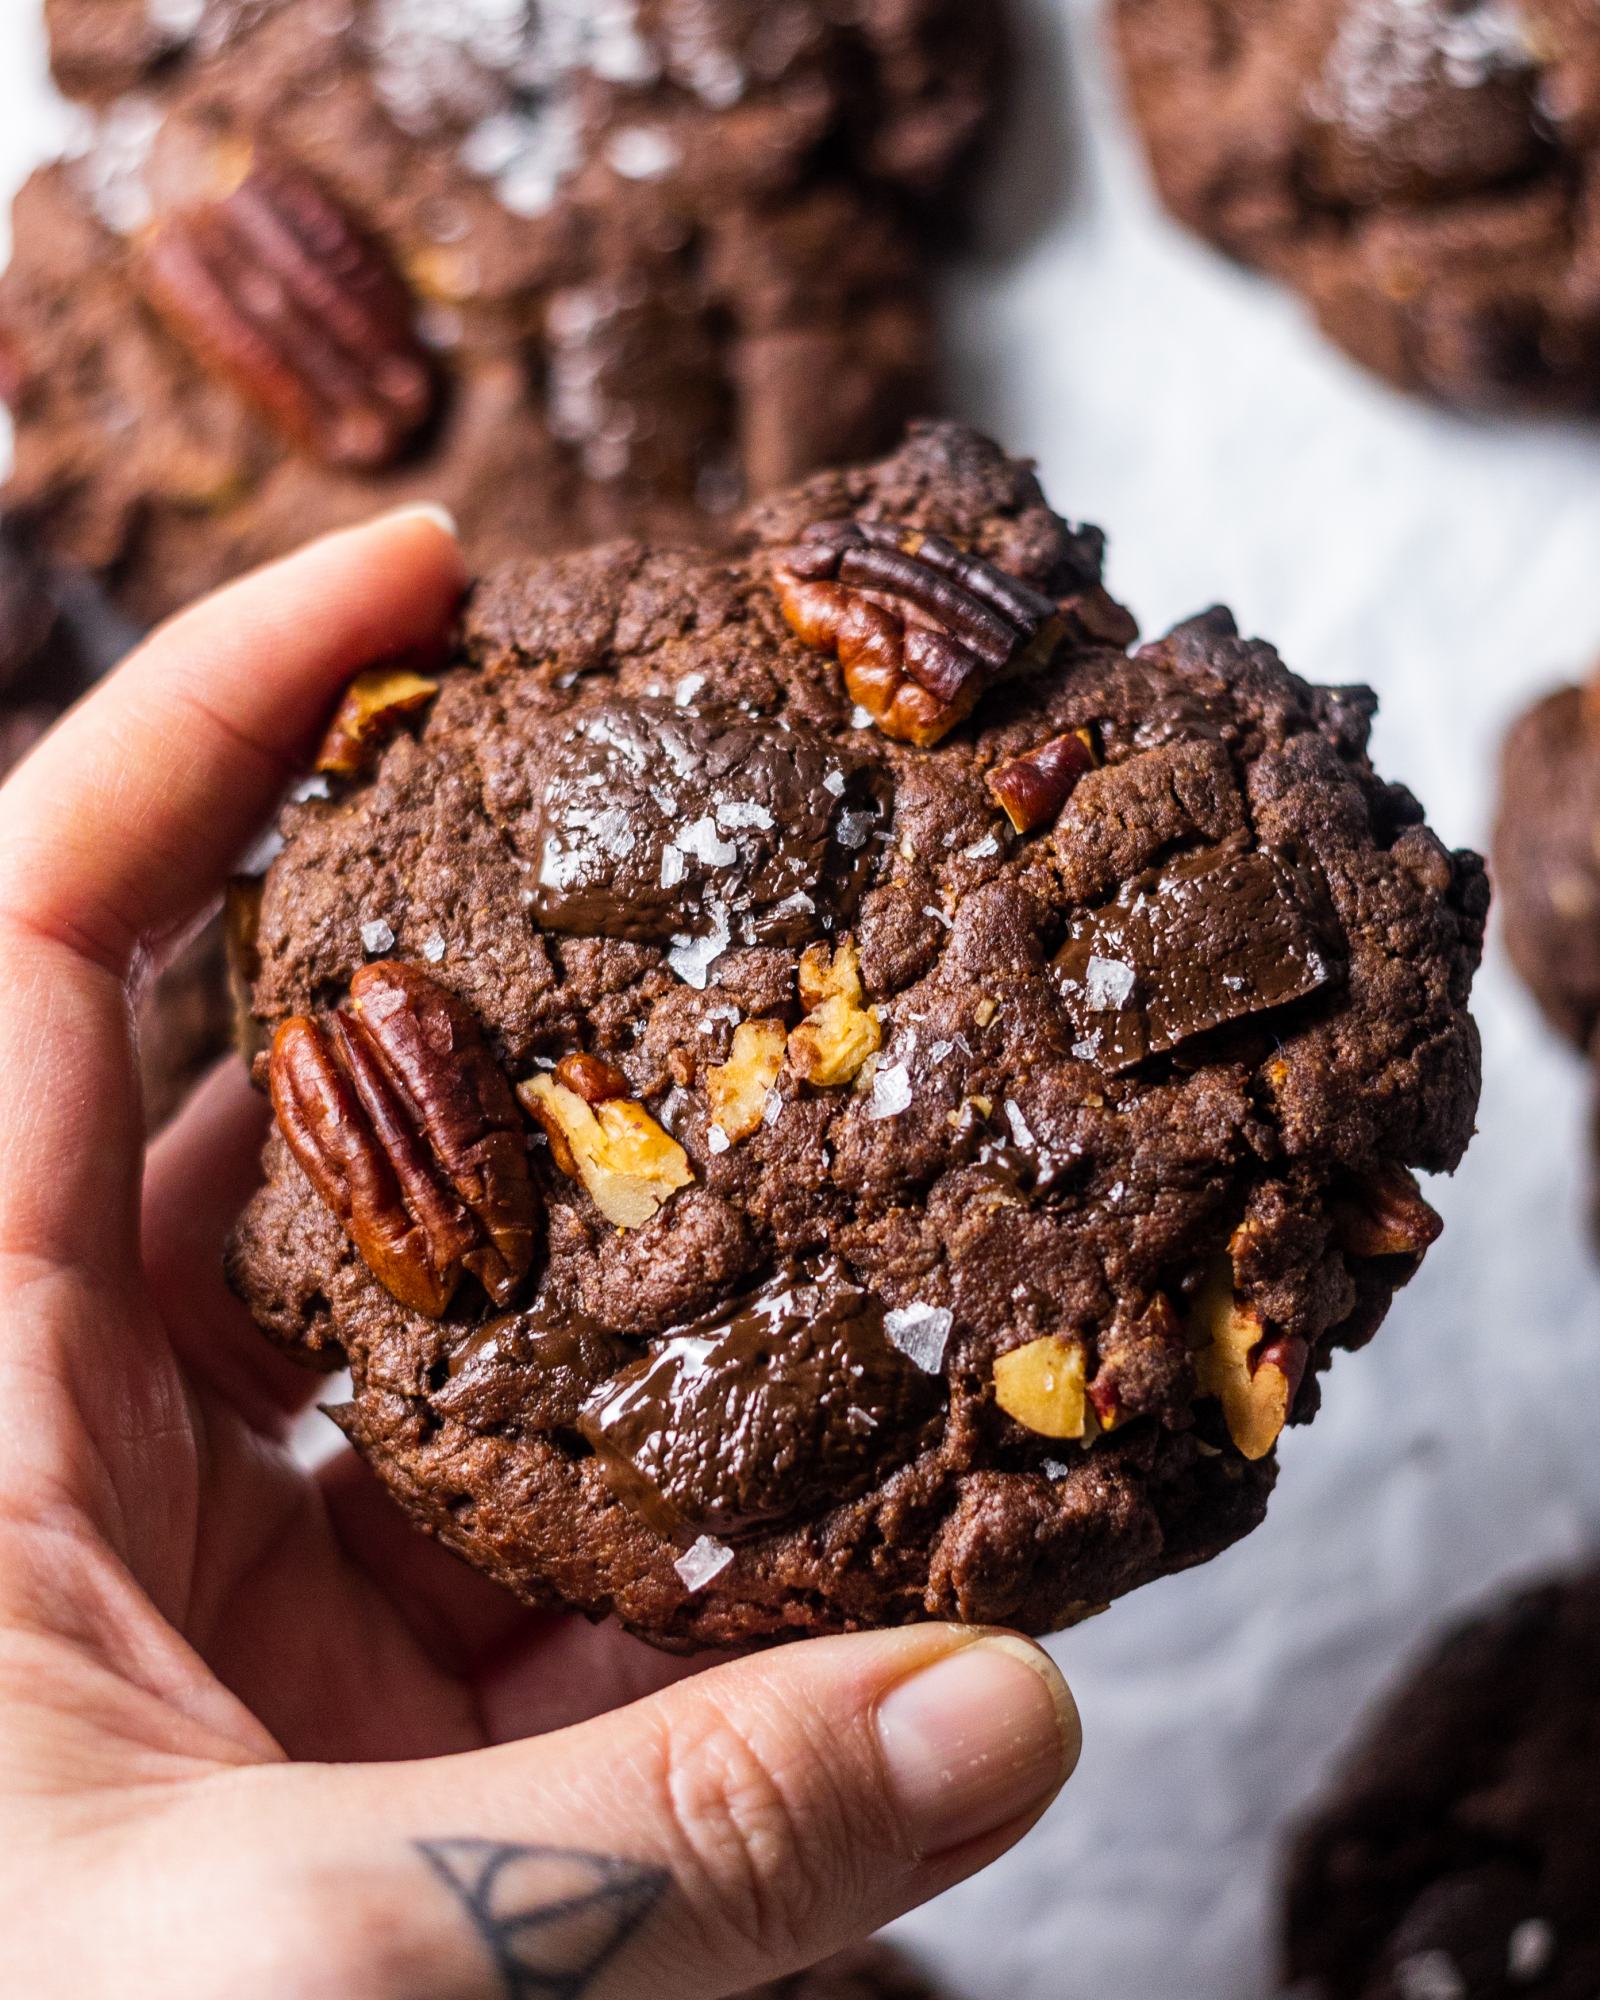 Hand holding a Vegan Triple Chocolate and Pecan Cookie with sea salt